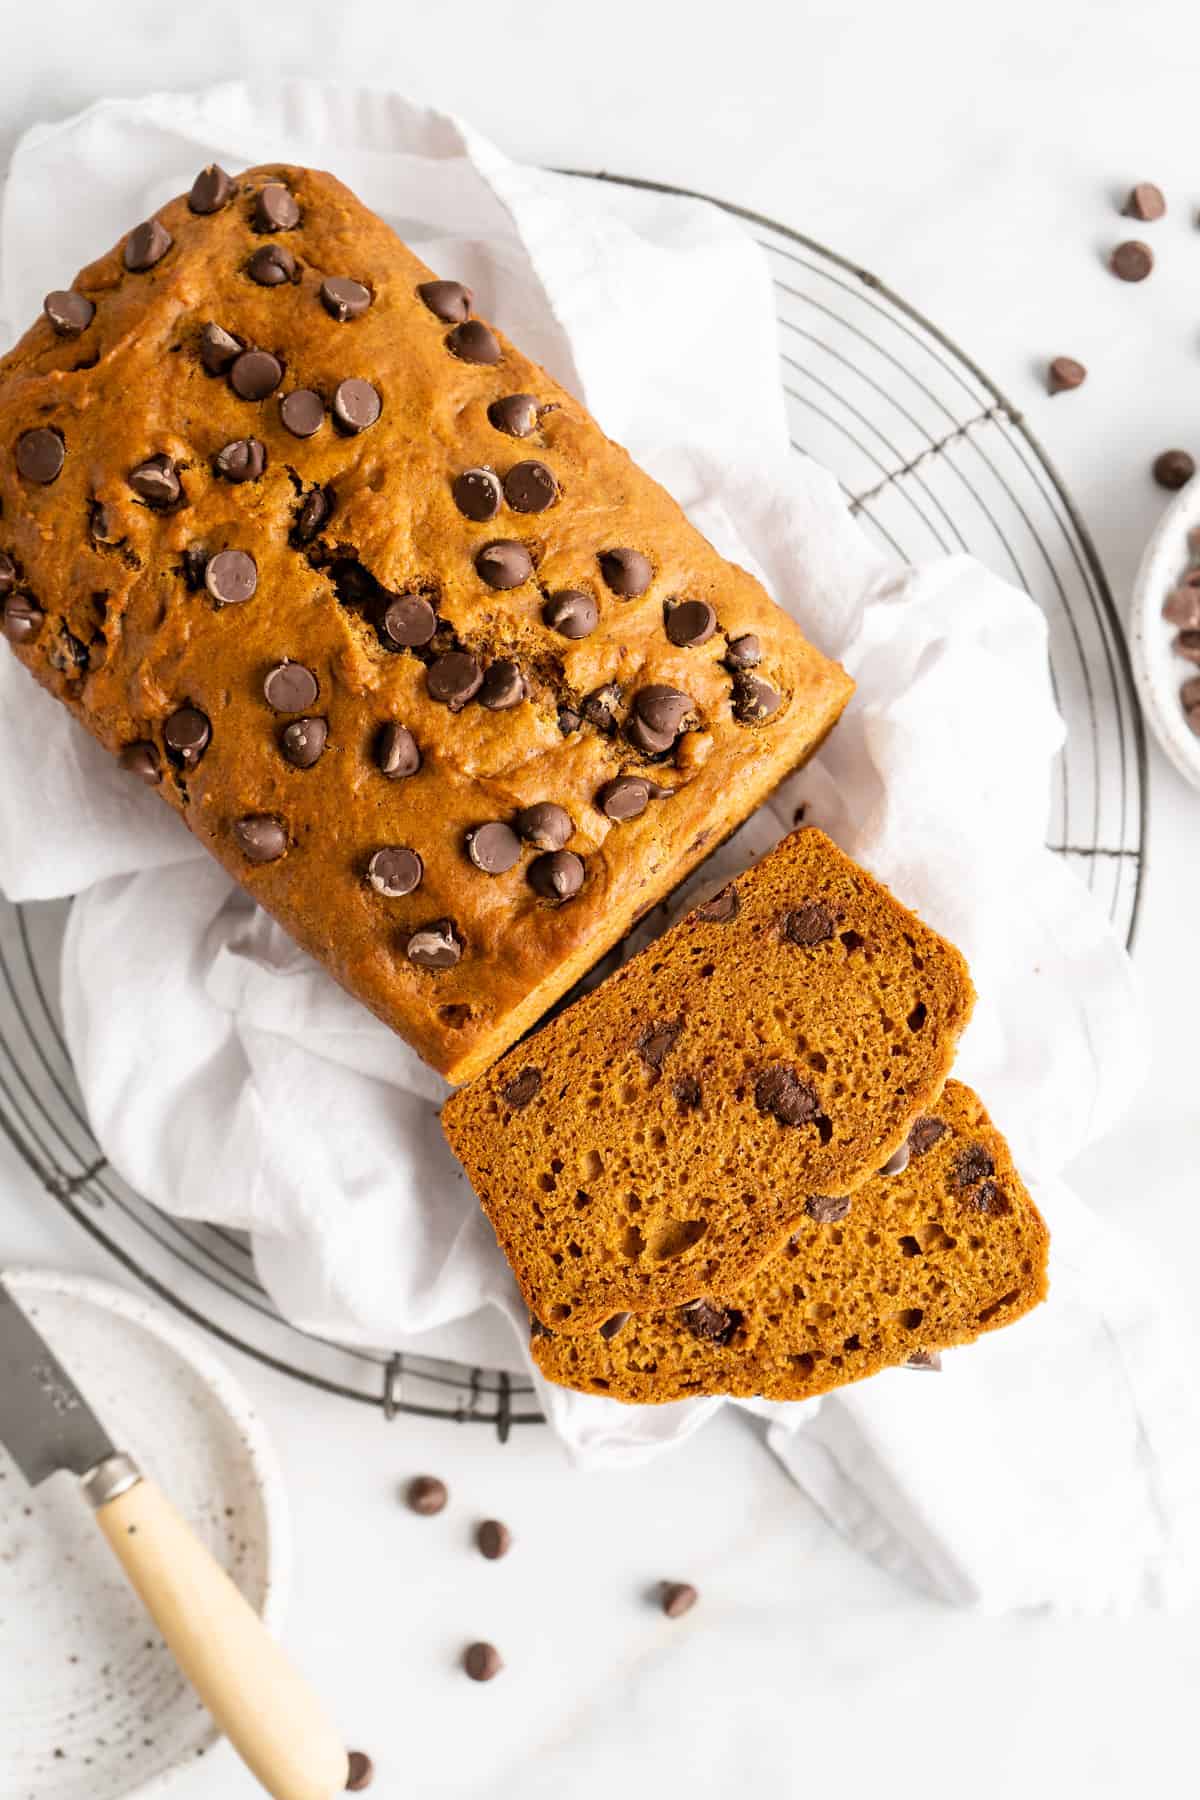 Chocolate chip pumpkin bread on cooling rack with two cut slices